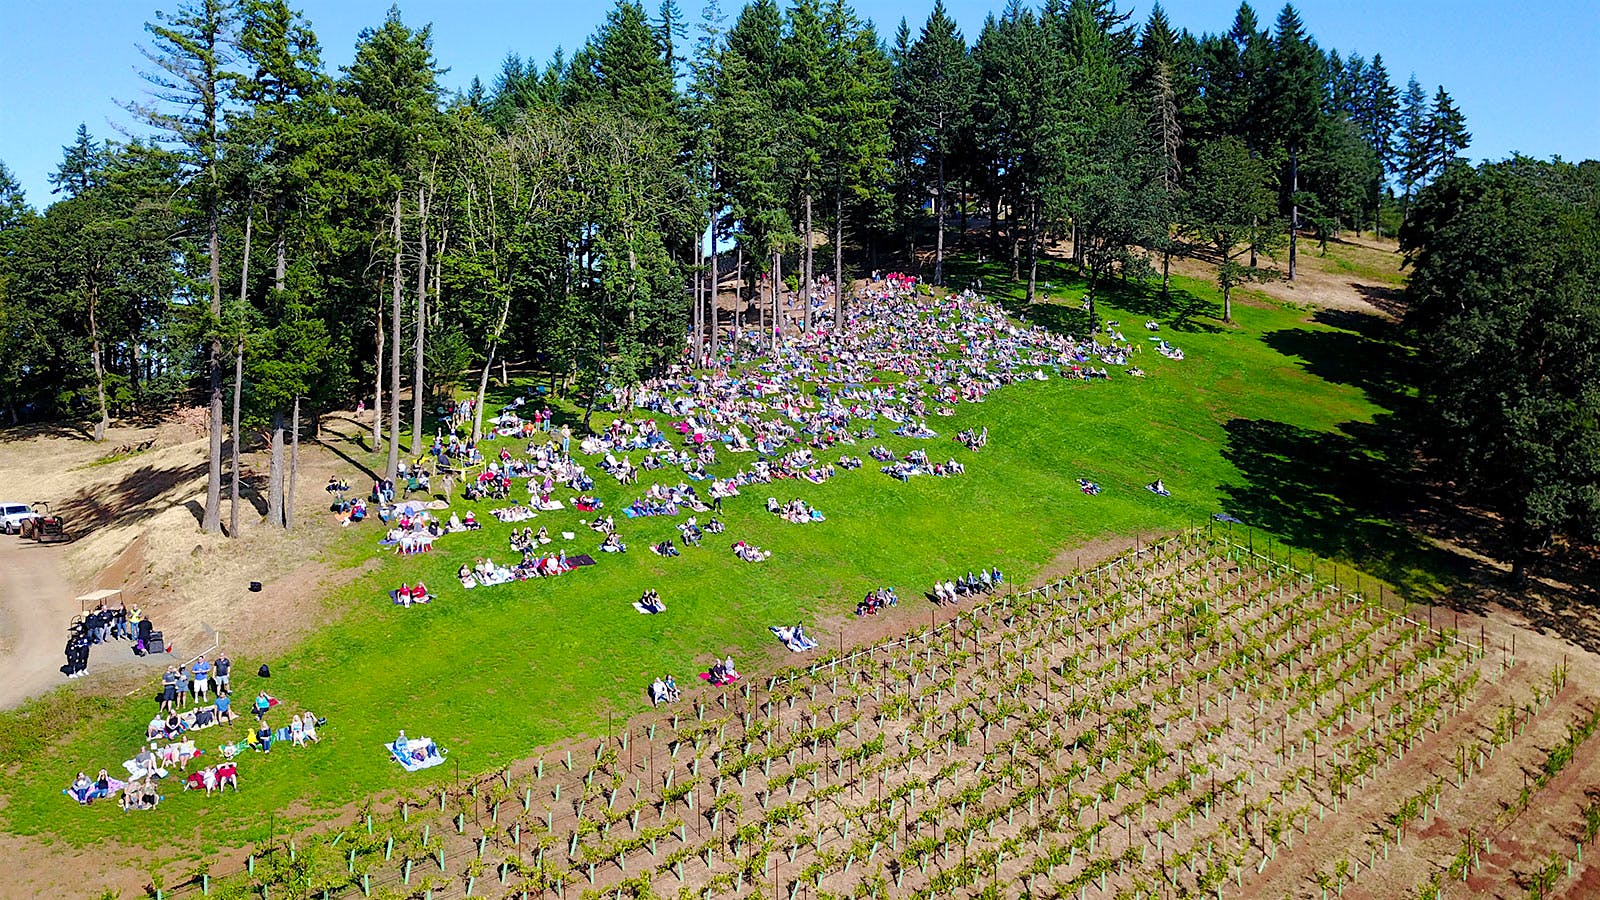 Oregon Wine Totally Overshadowed (by Eclipse)